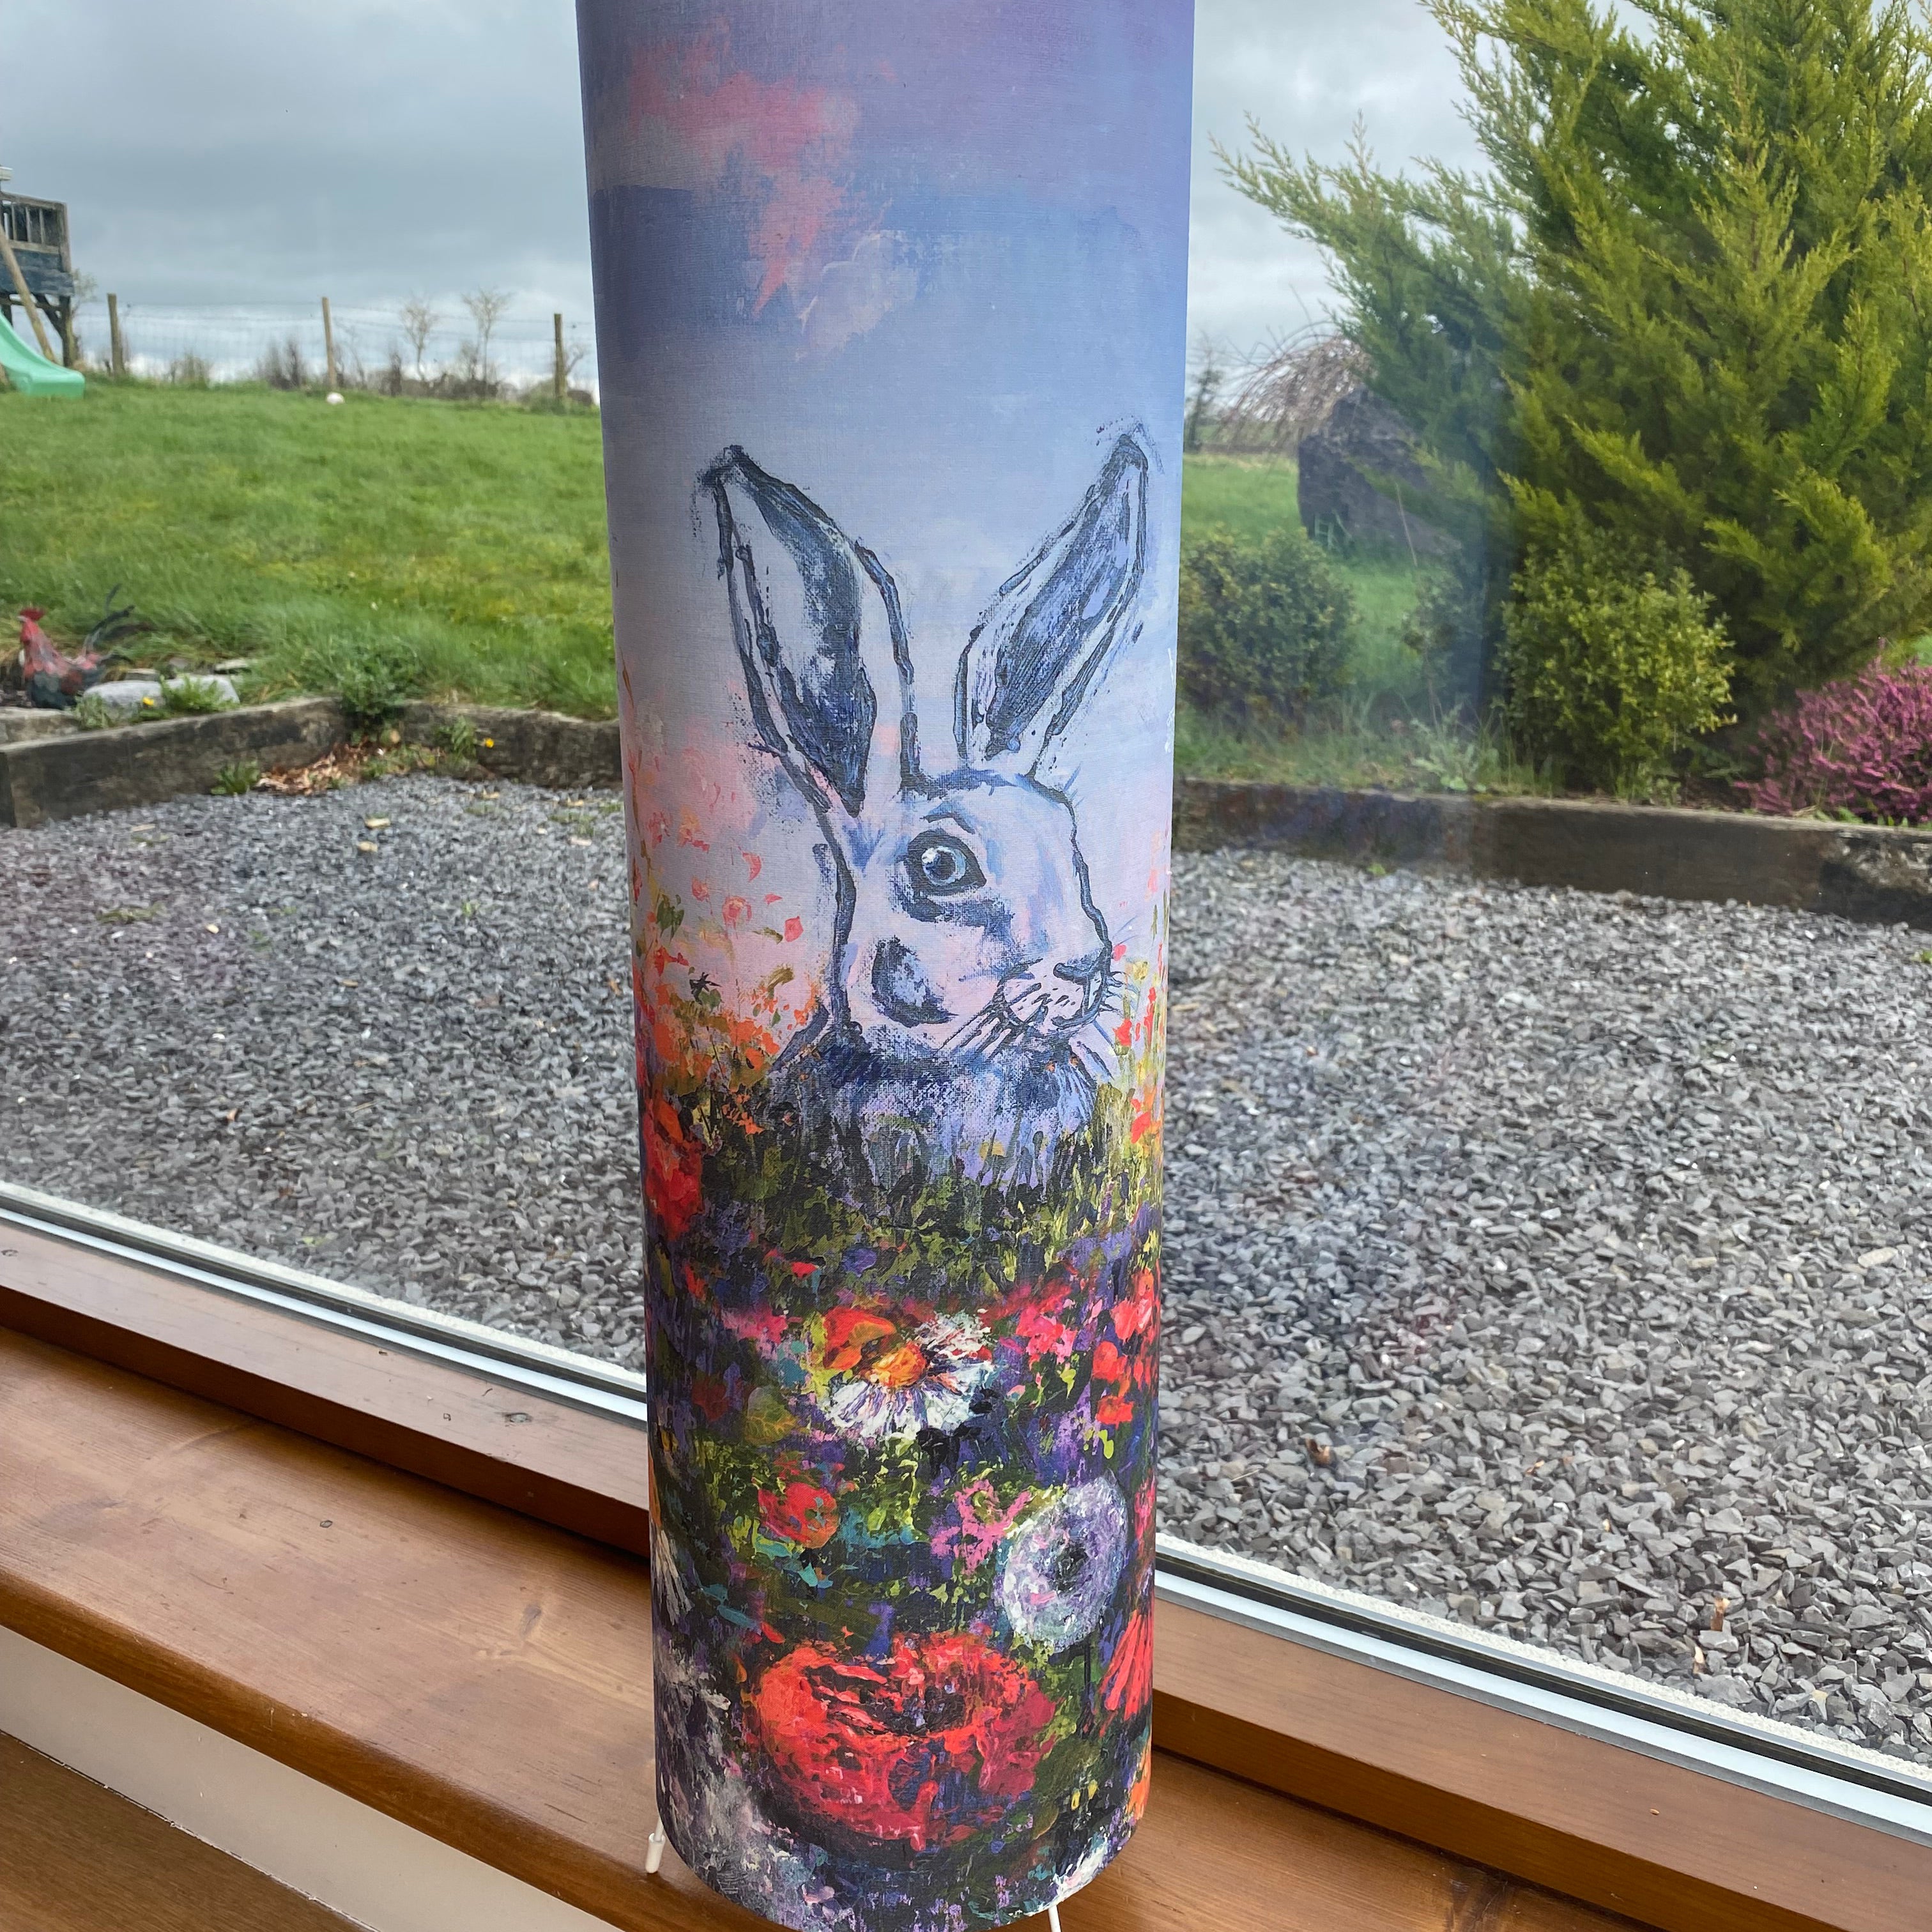 Floor lamp with image of hare